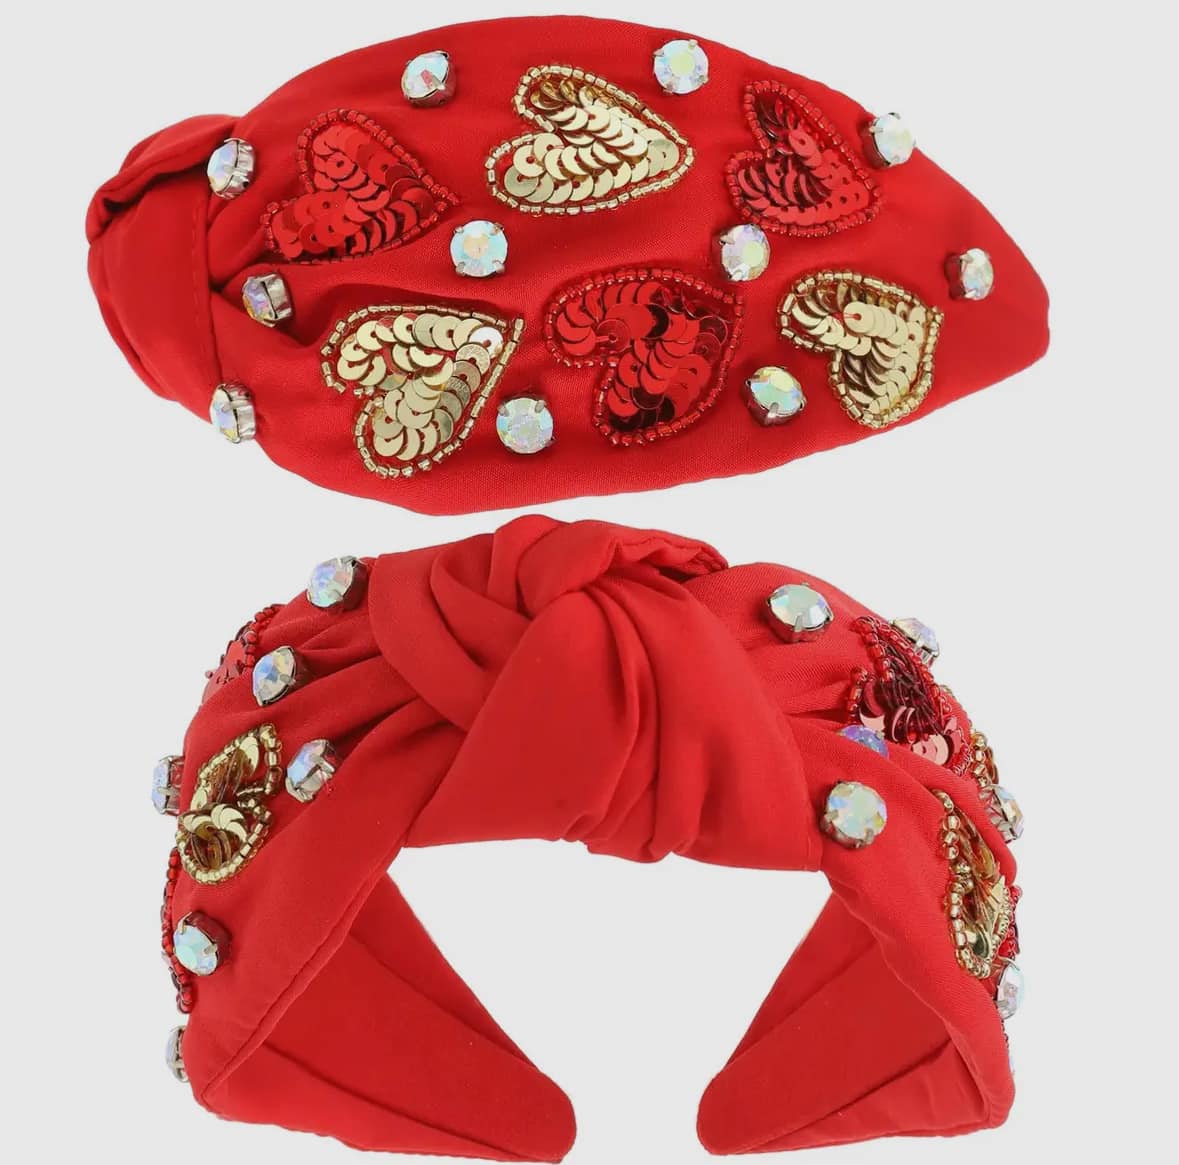 Valentines Knotted Embellished Headband: Red/Gold Hearts